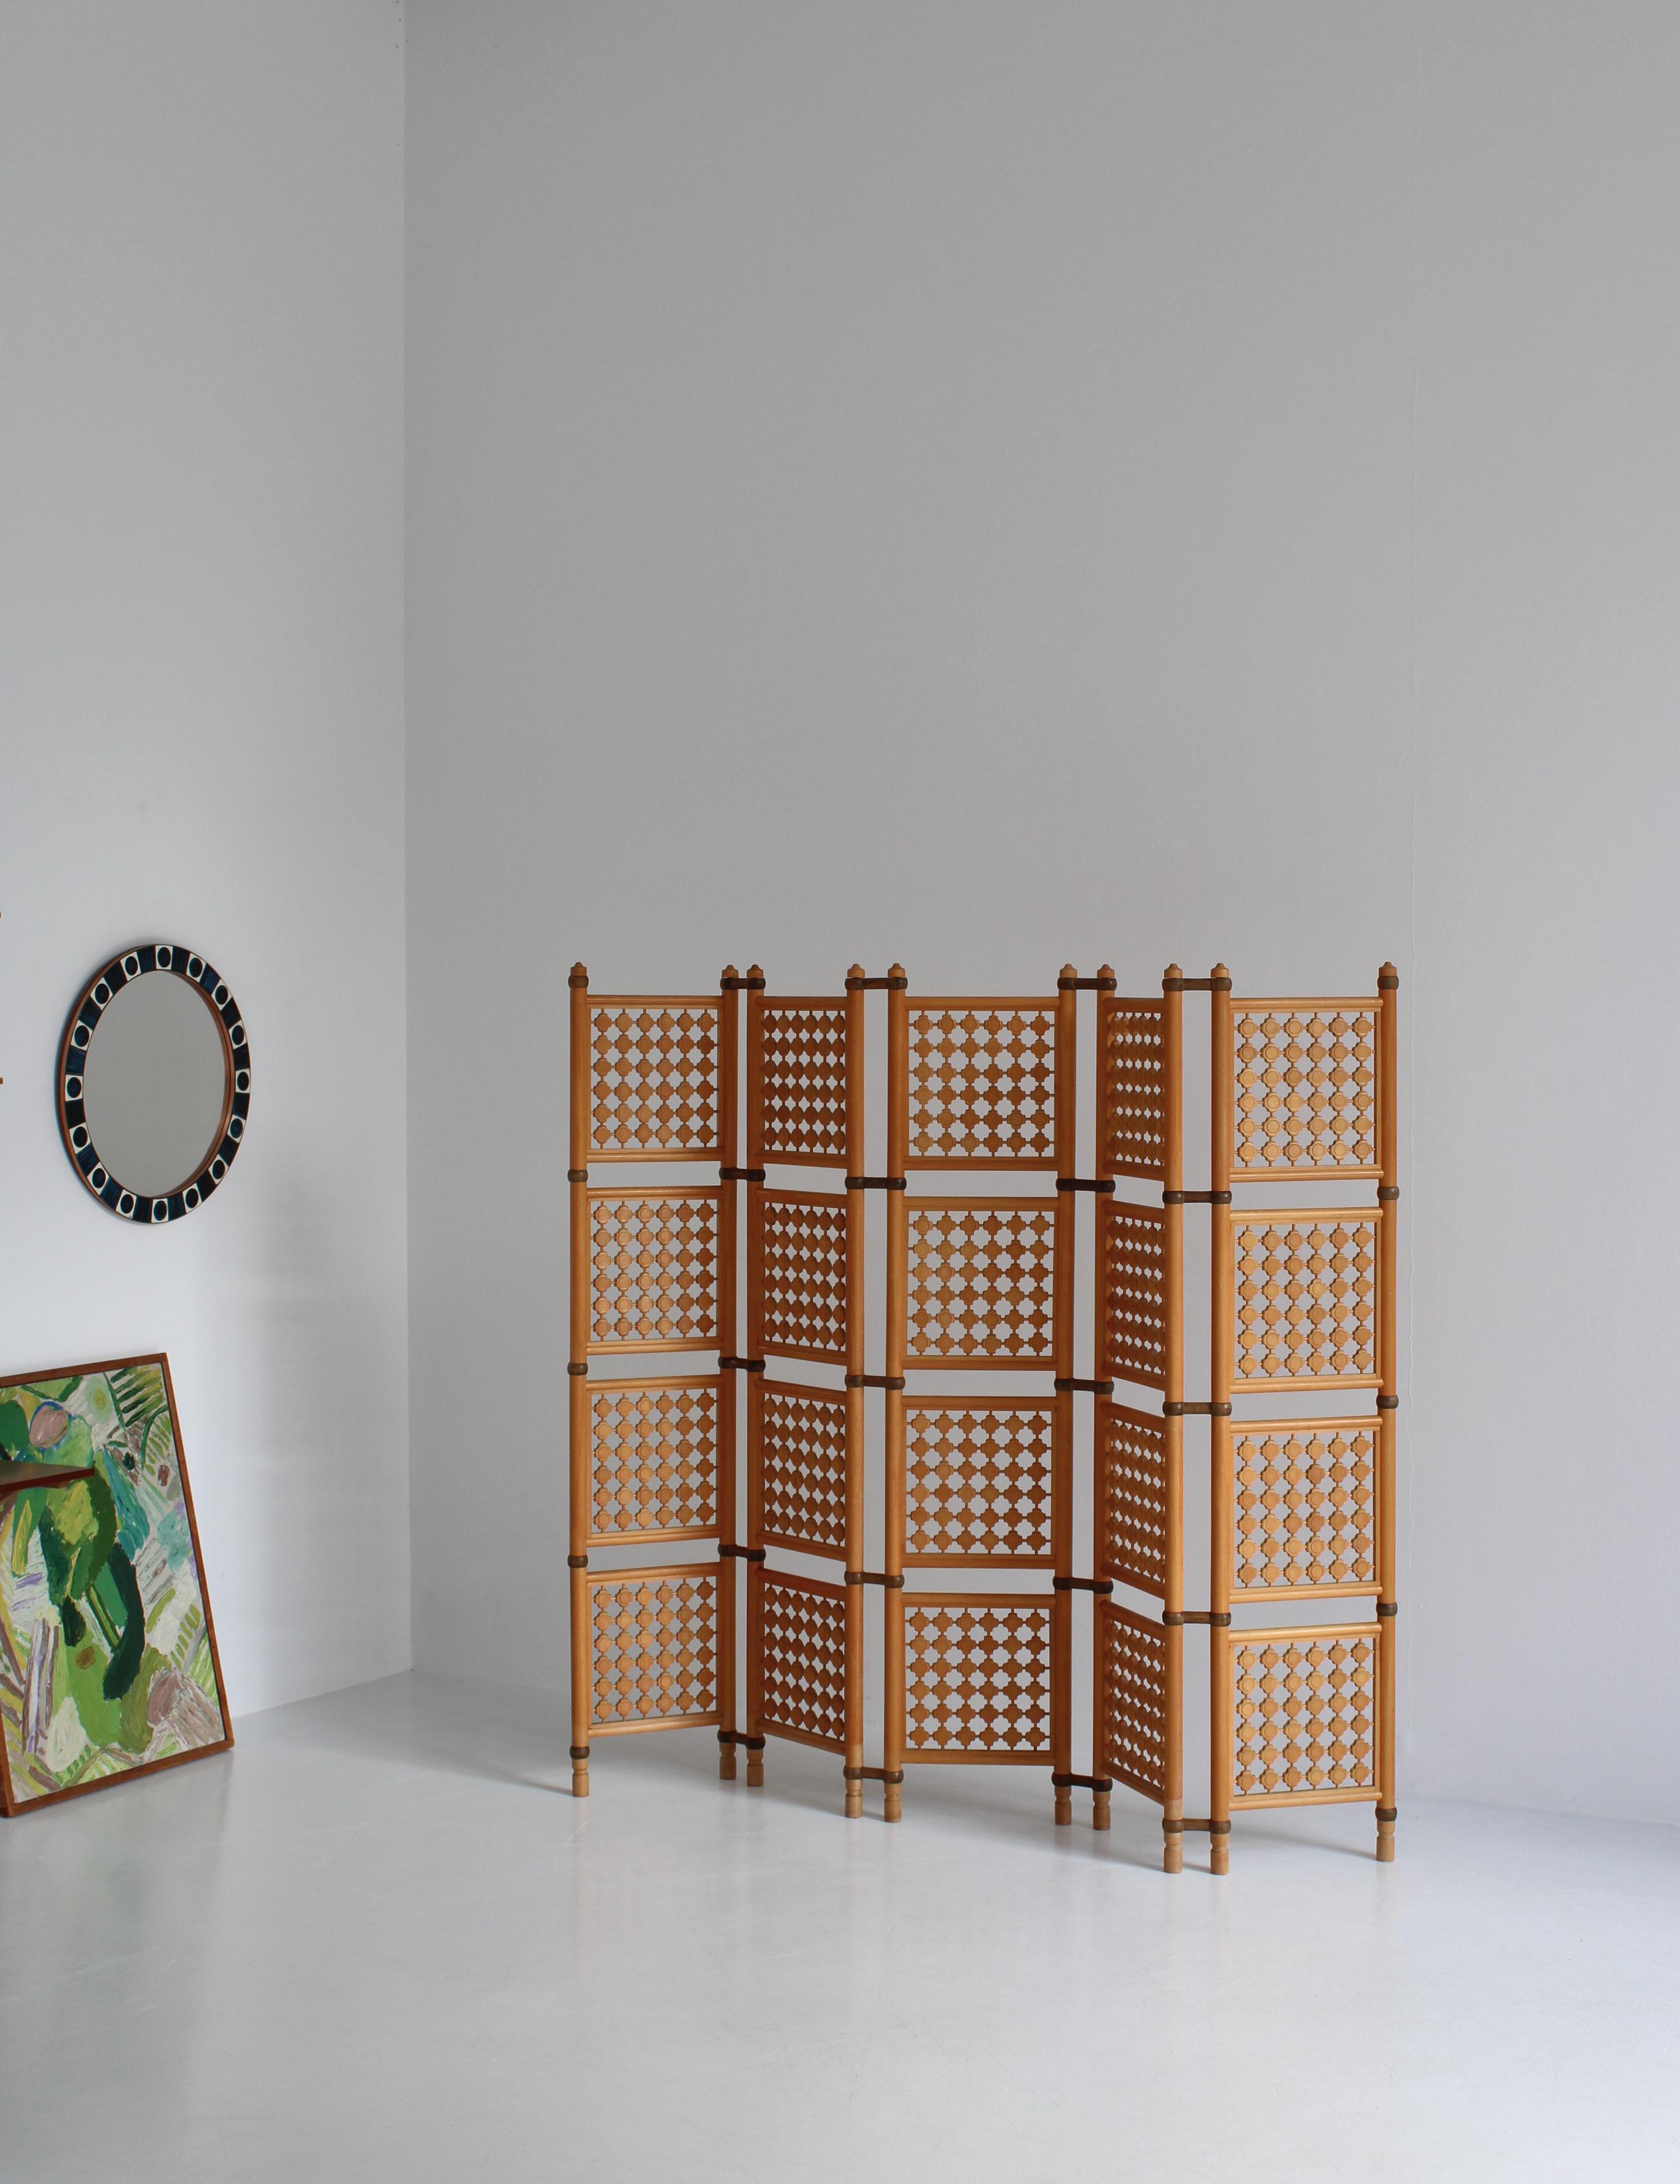 Set of Scandinavian Modern Screens or Room Dividers in Stained Beechwood, 1940s For Sale 13